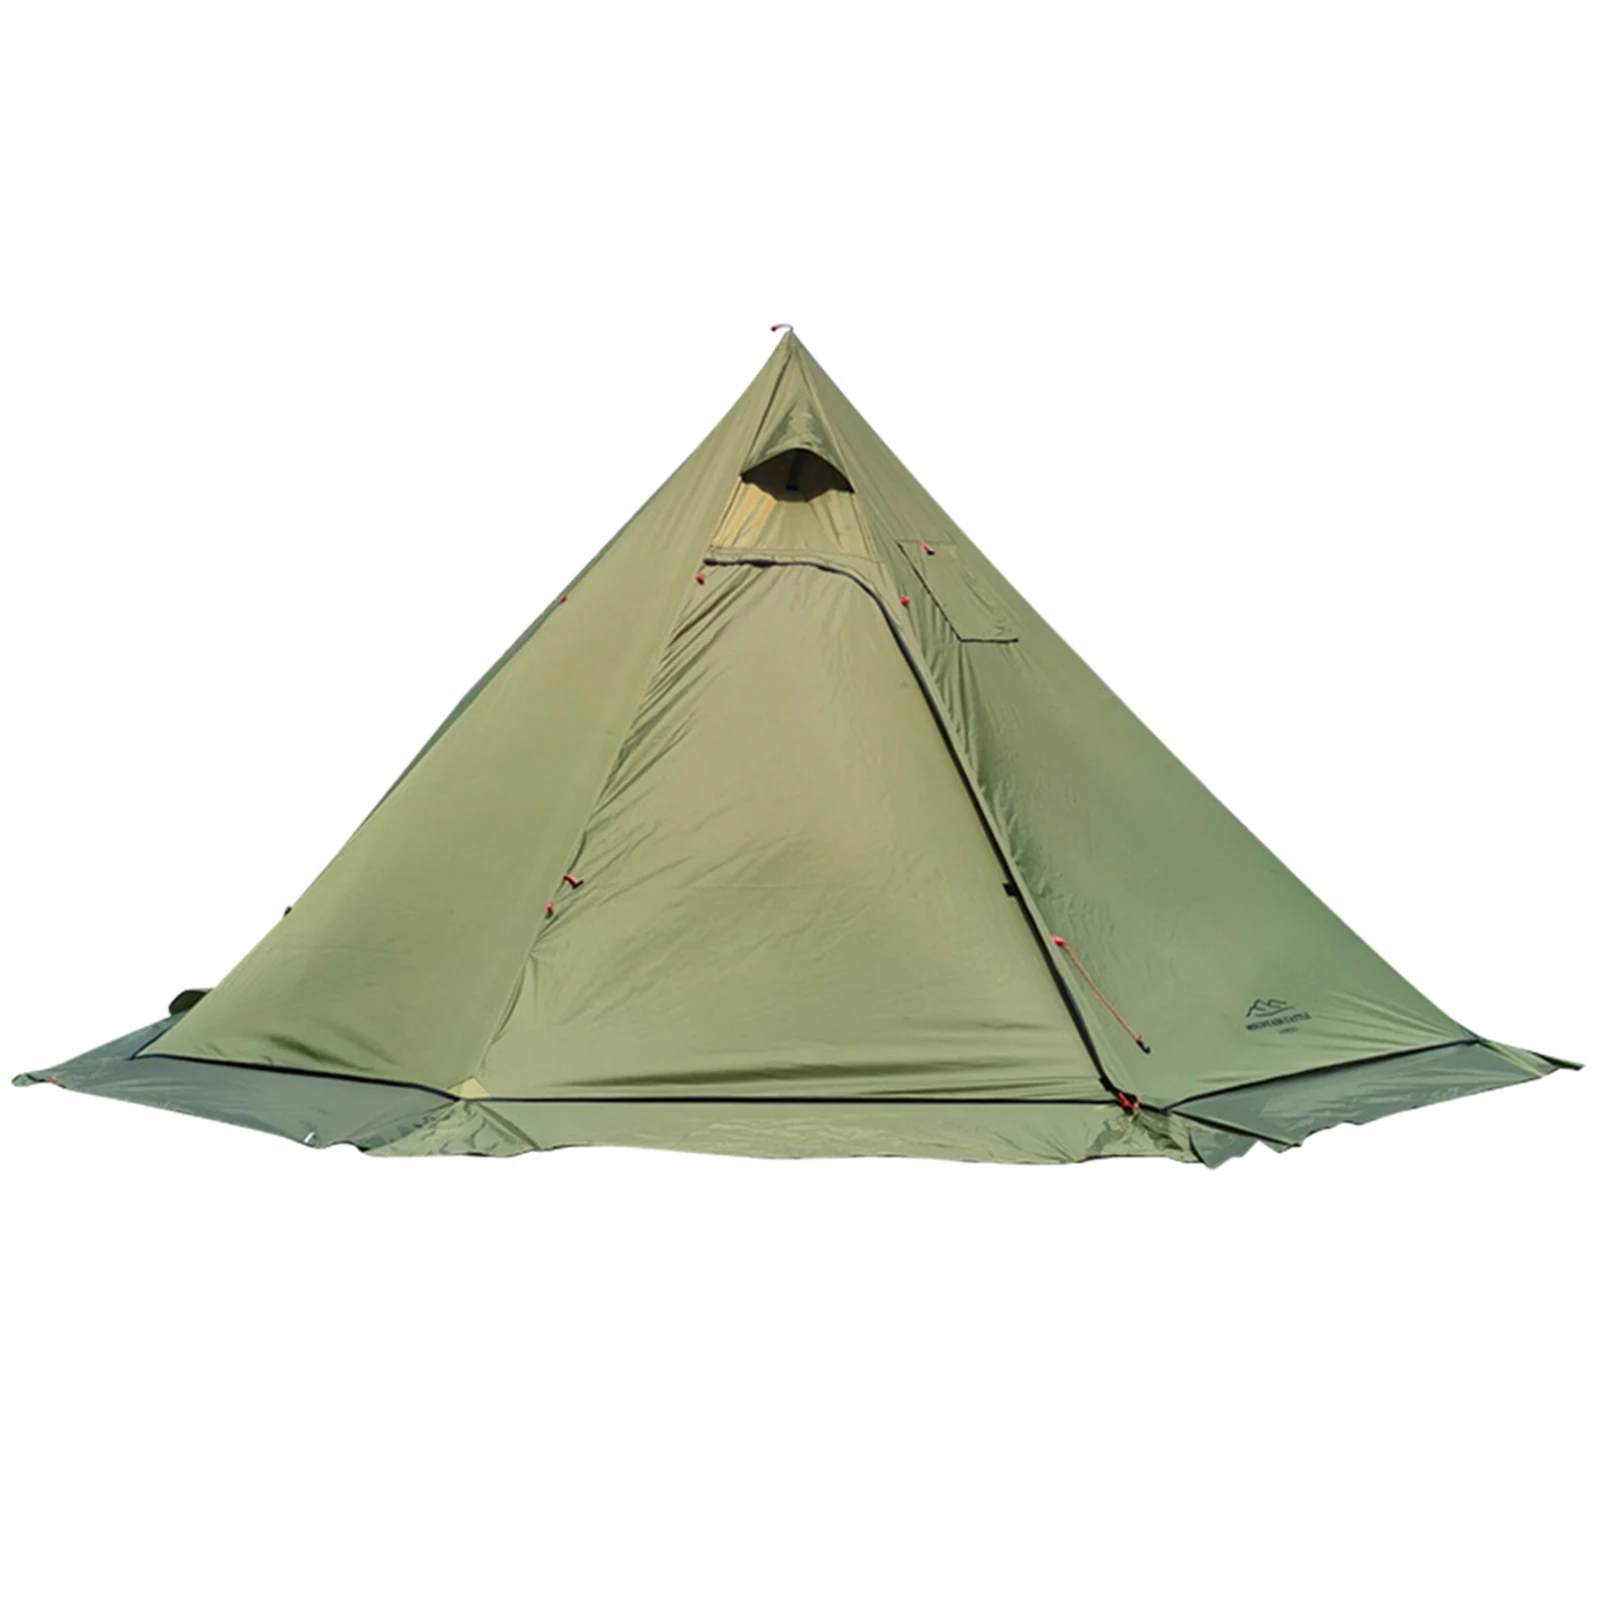 

2 Person Camping Tent Rainproof Pyramid Tent Ultralight Outdoor Teepee Tent with Stove Jack for Picnic Backpacking Hiking